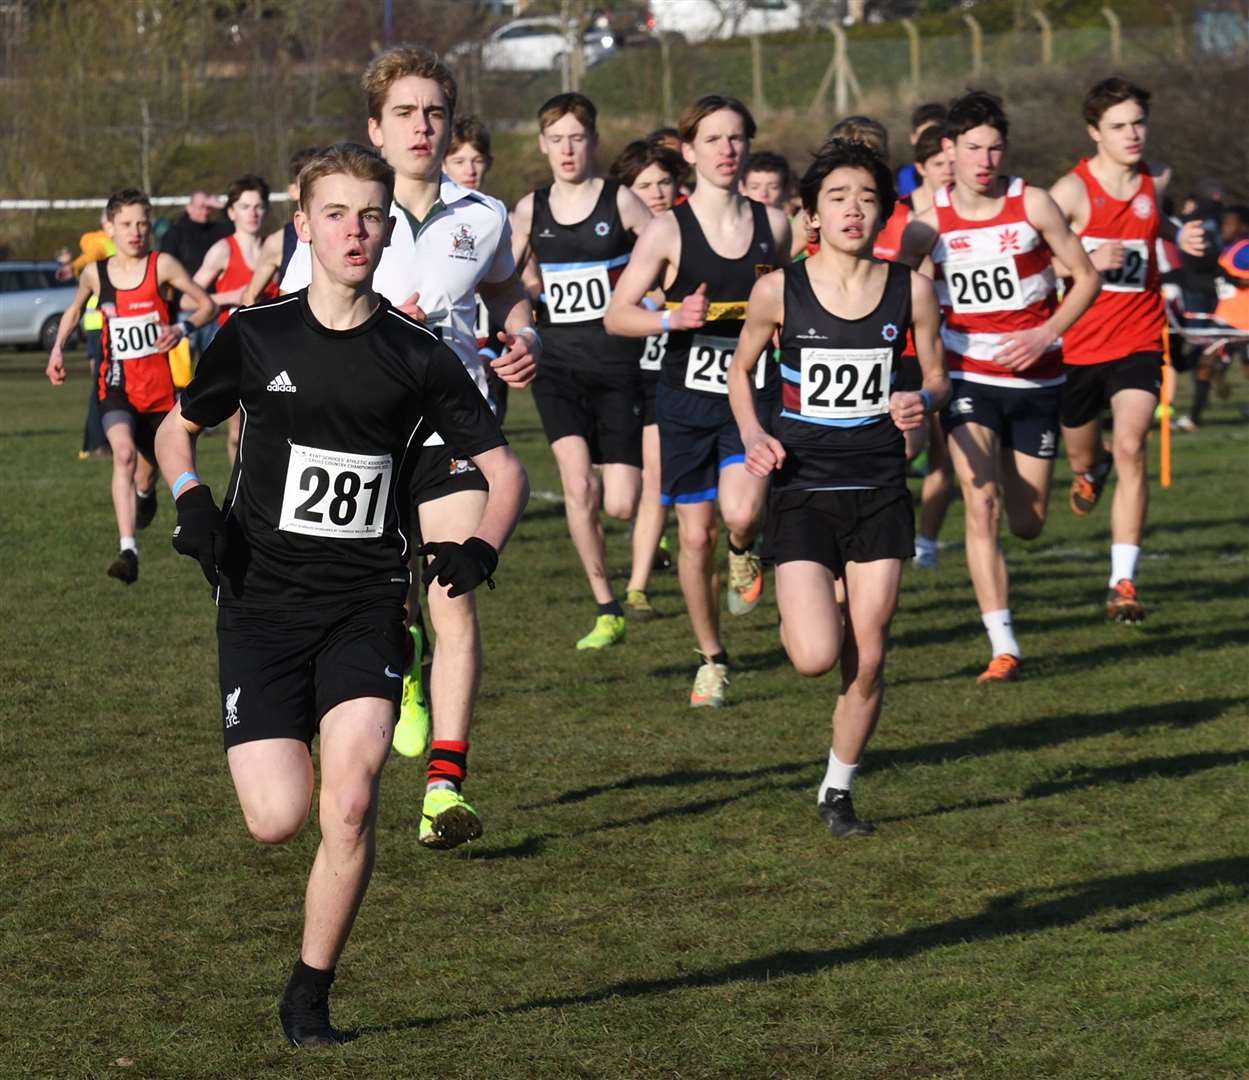 South East Kent's Oliver Regan takes an early lead in the junior boys' race. Picture: Simon Hildrew (62006458)